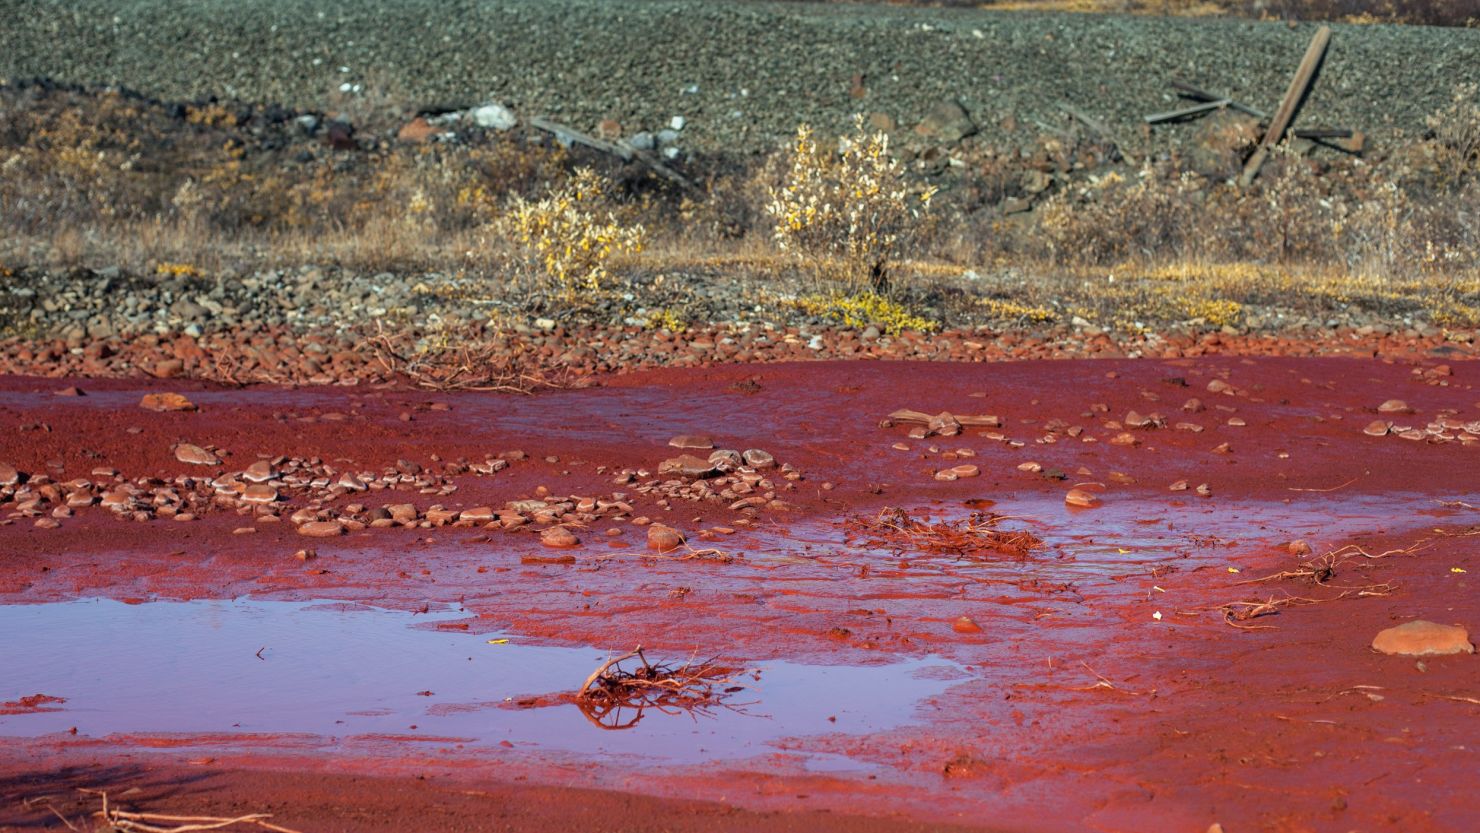 Norilsk Nickel, the world's largest nickel producer, said Monday that a dike at its Nadezhda plant overflowed, coloring the Daldykan River blood red.  